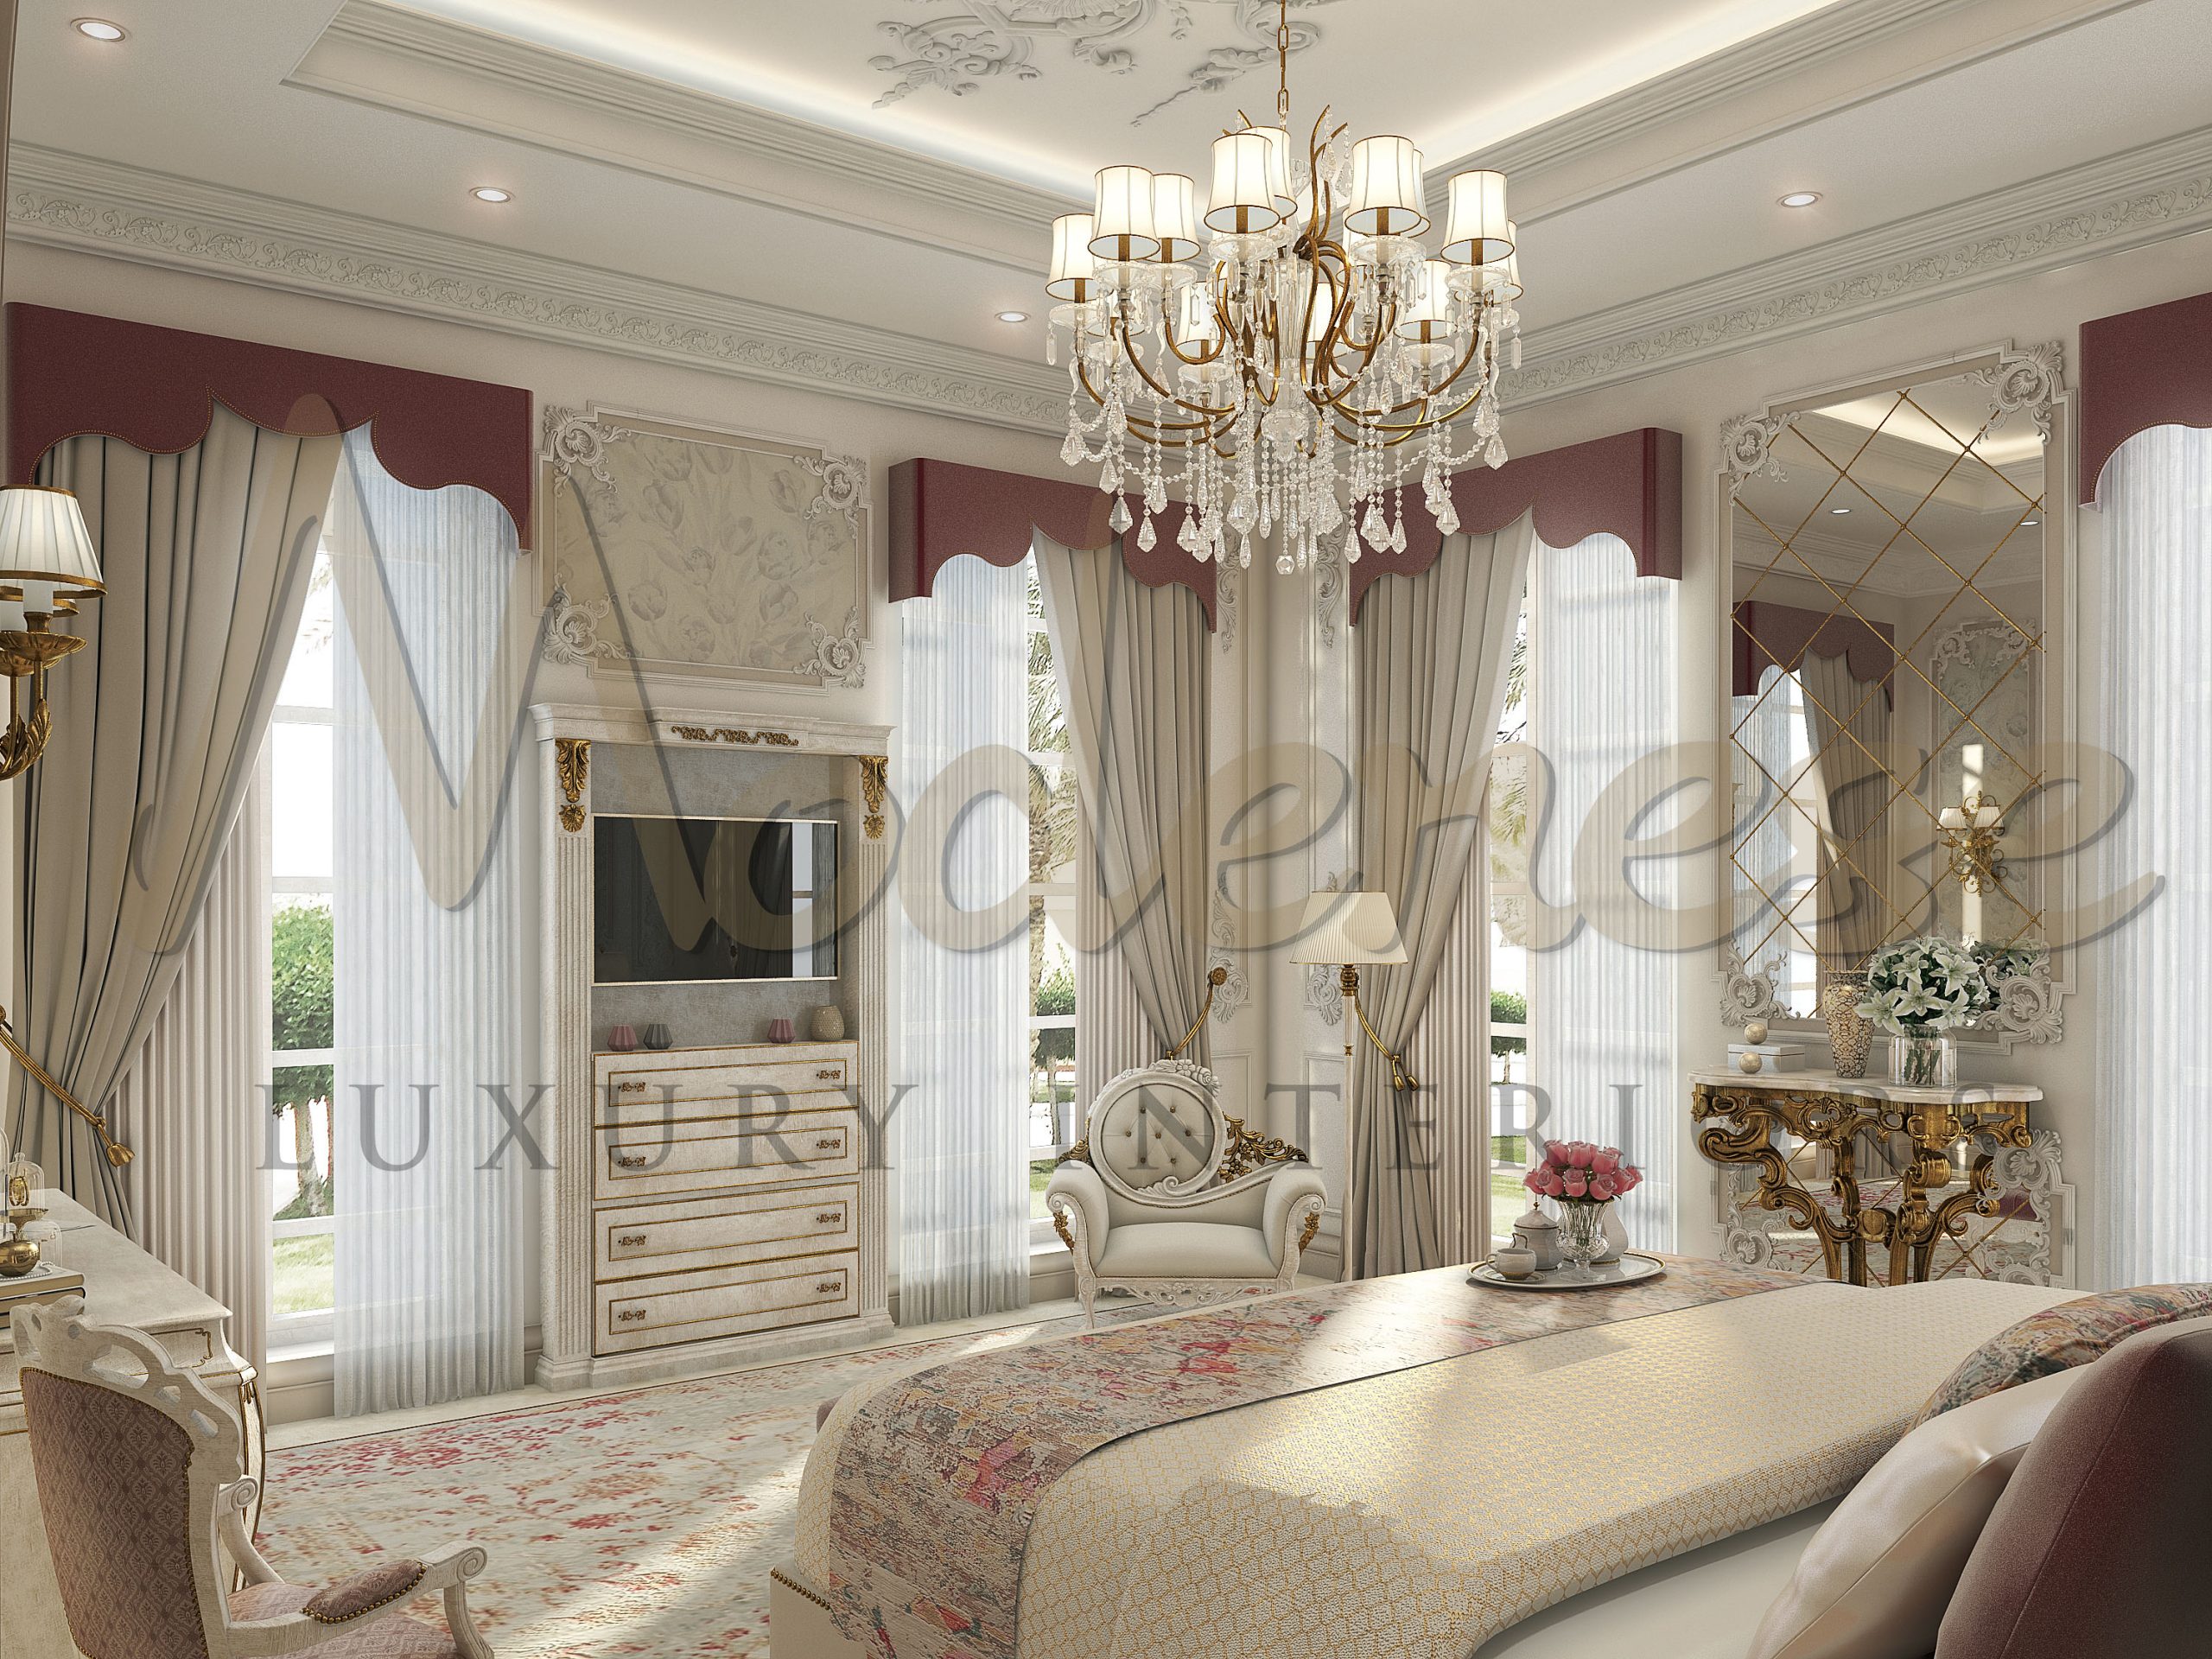 Exquisite Classical Bedroom For Mansion in Kenya